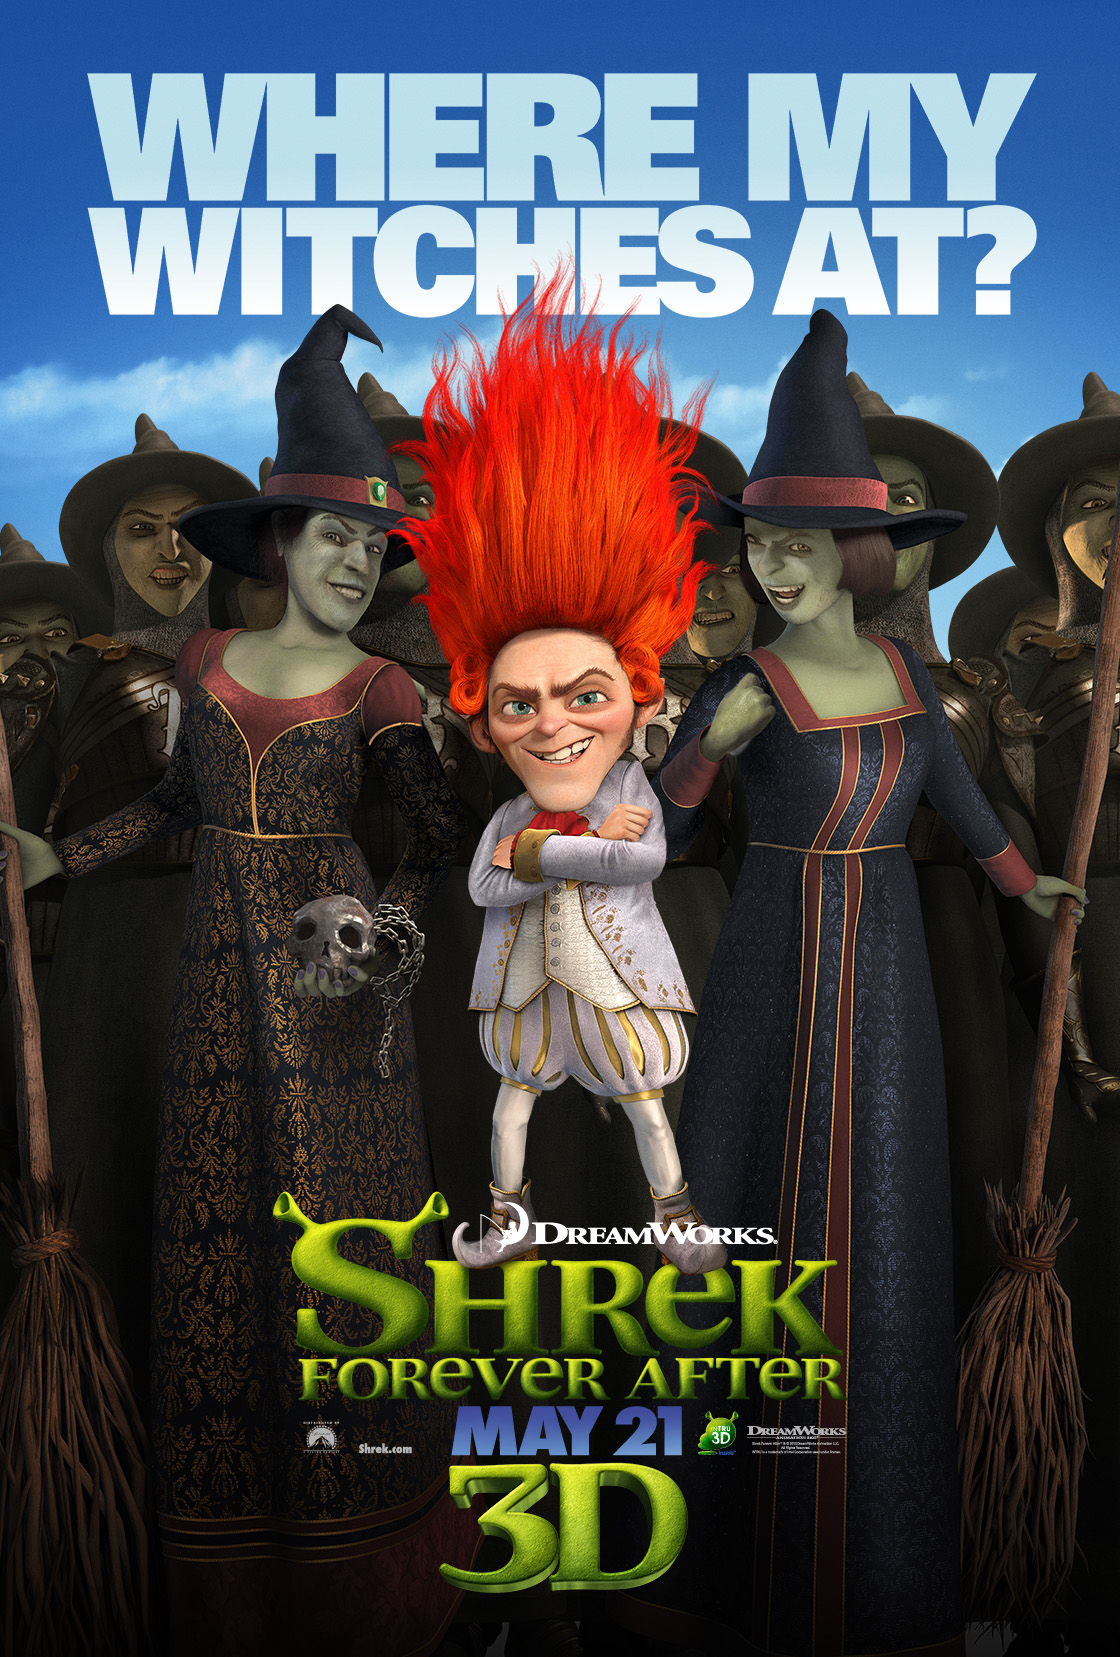 Shrek Forever After Backgrounds, Compatible - PC, Mobile, Gadgets| 1120x1657 px